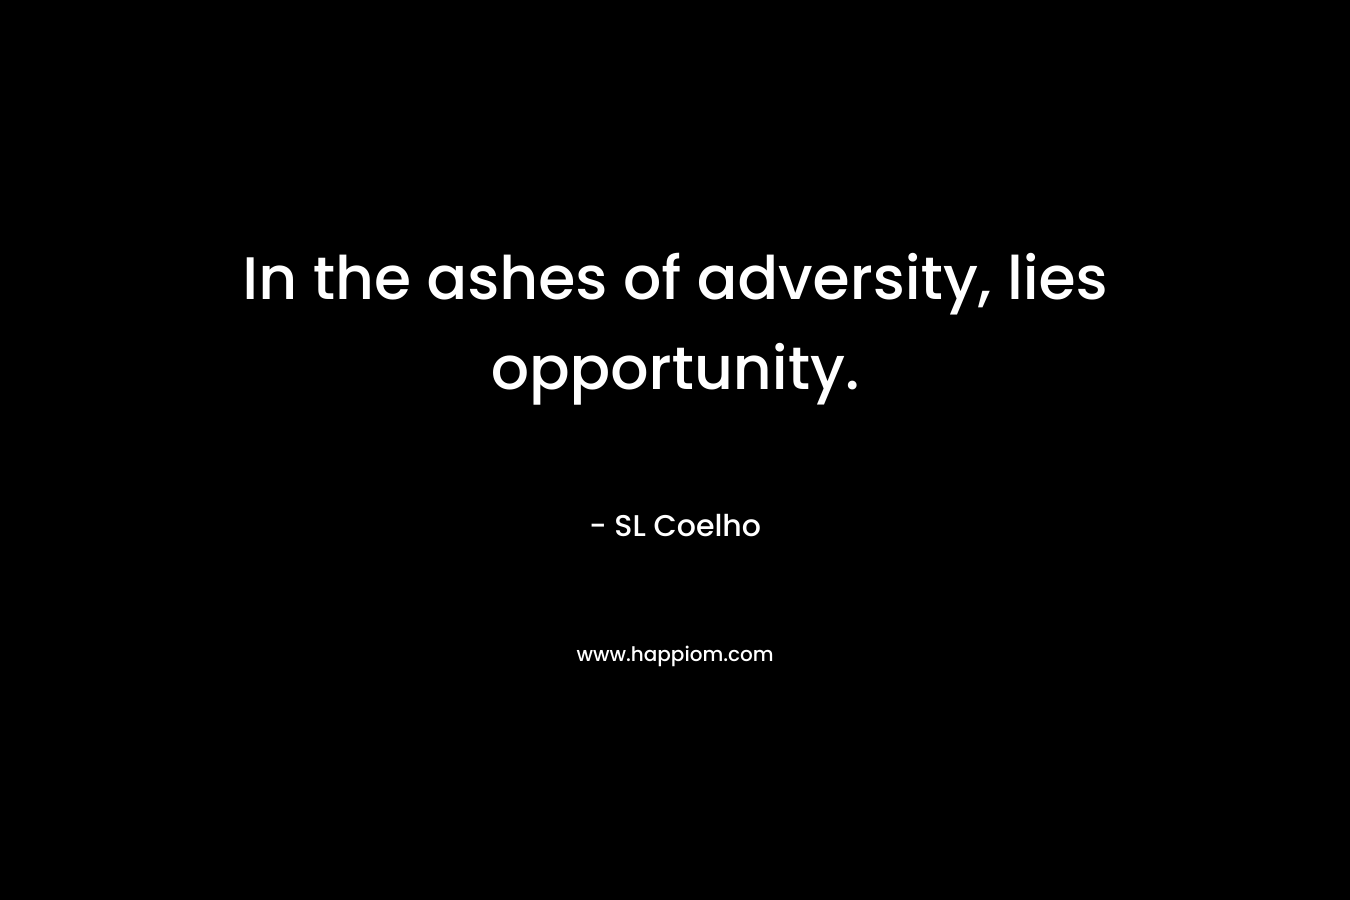 In the ashes of adversity, lies opportunity. – SL Coelho